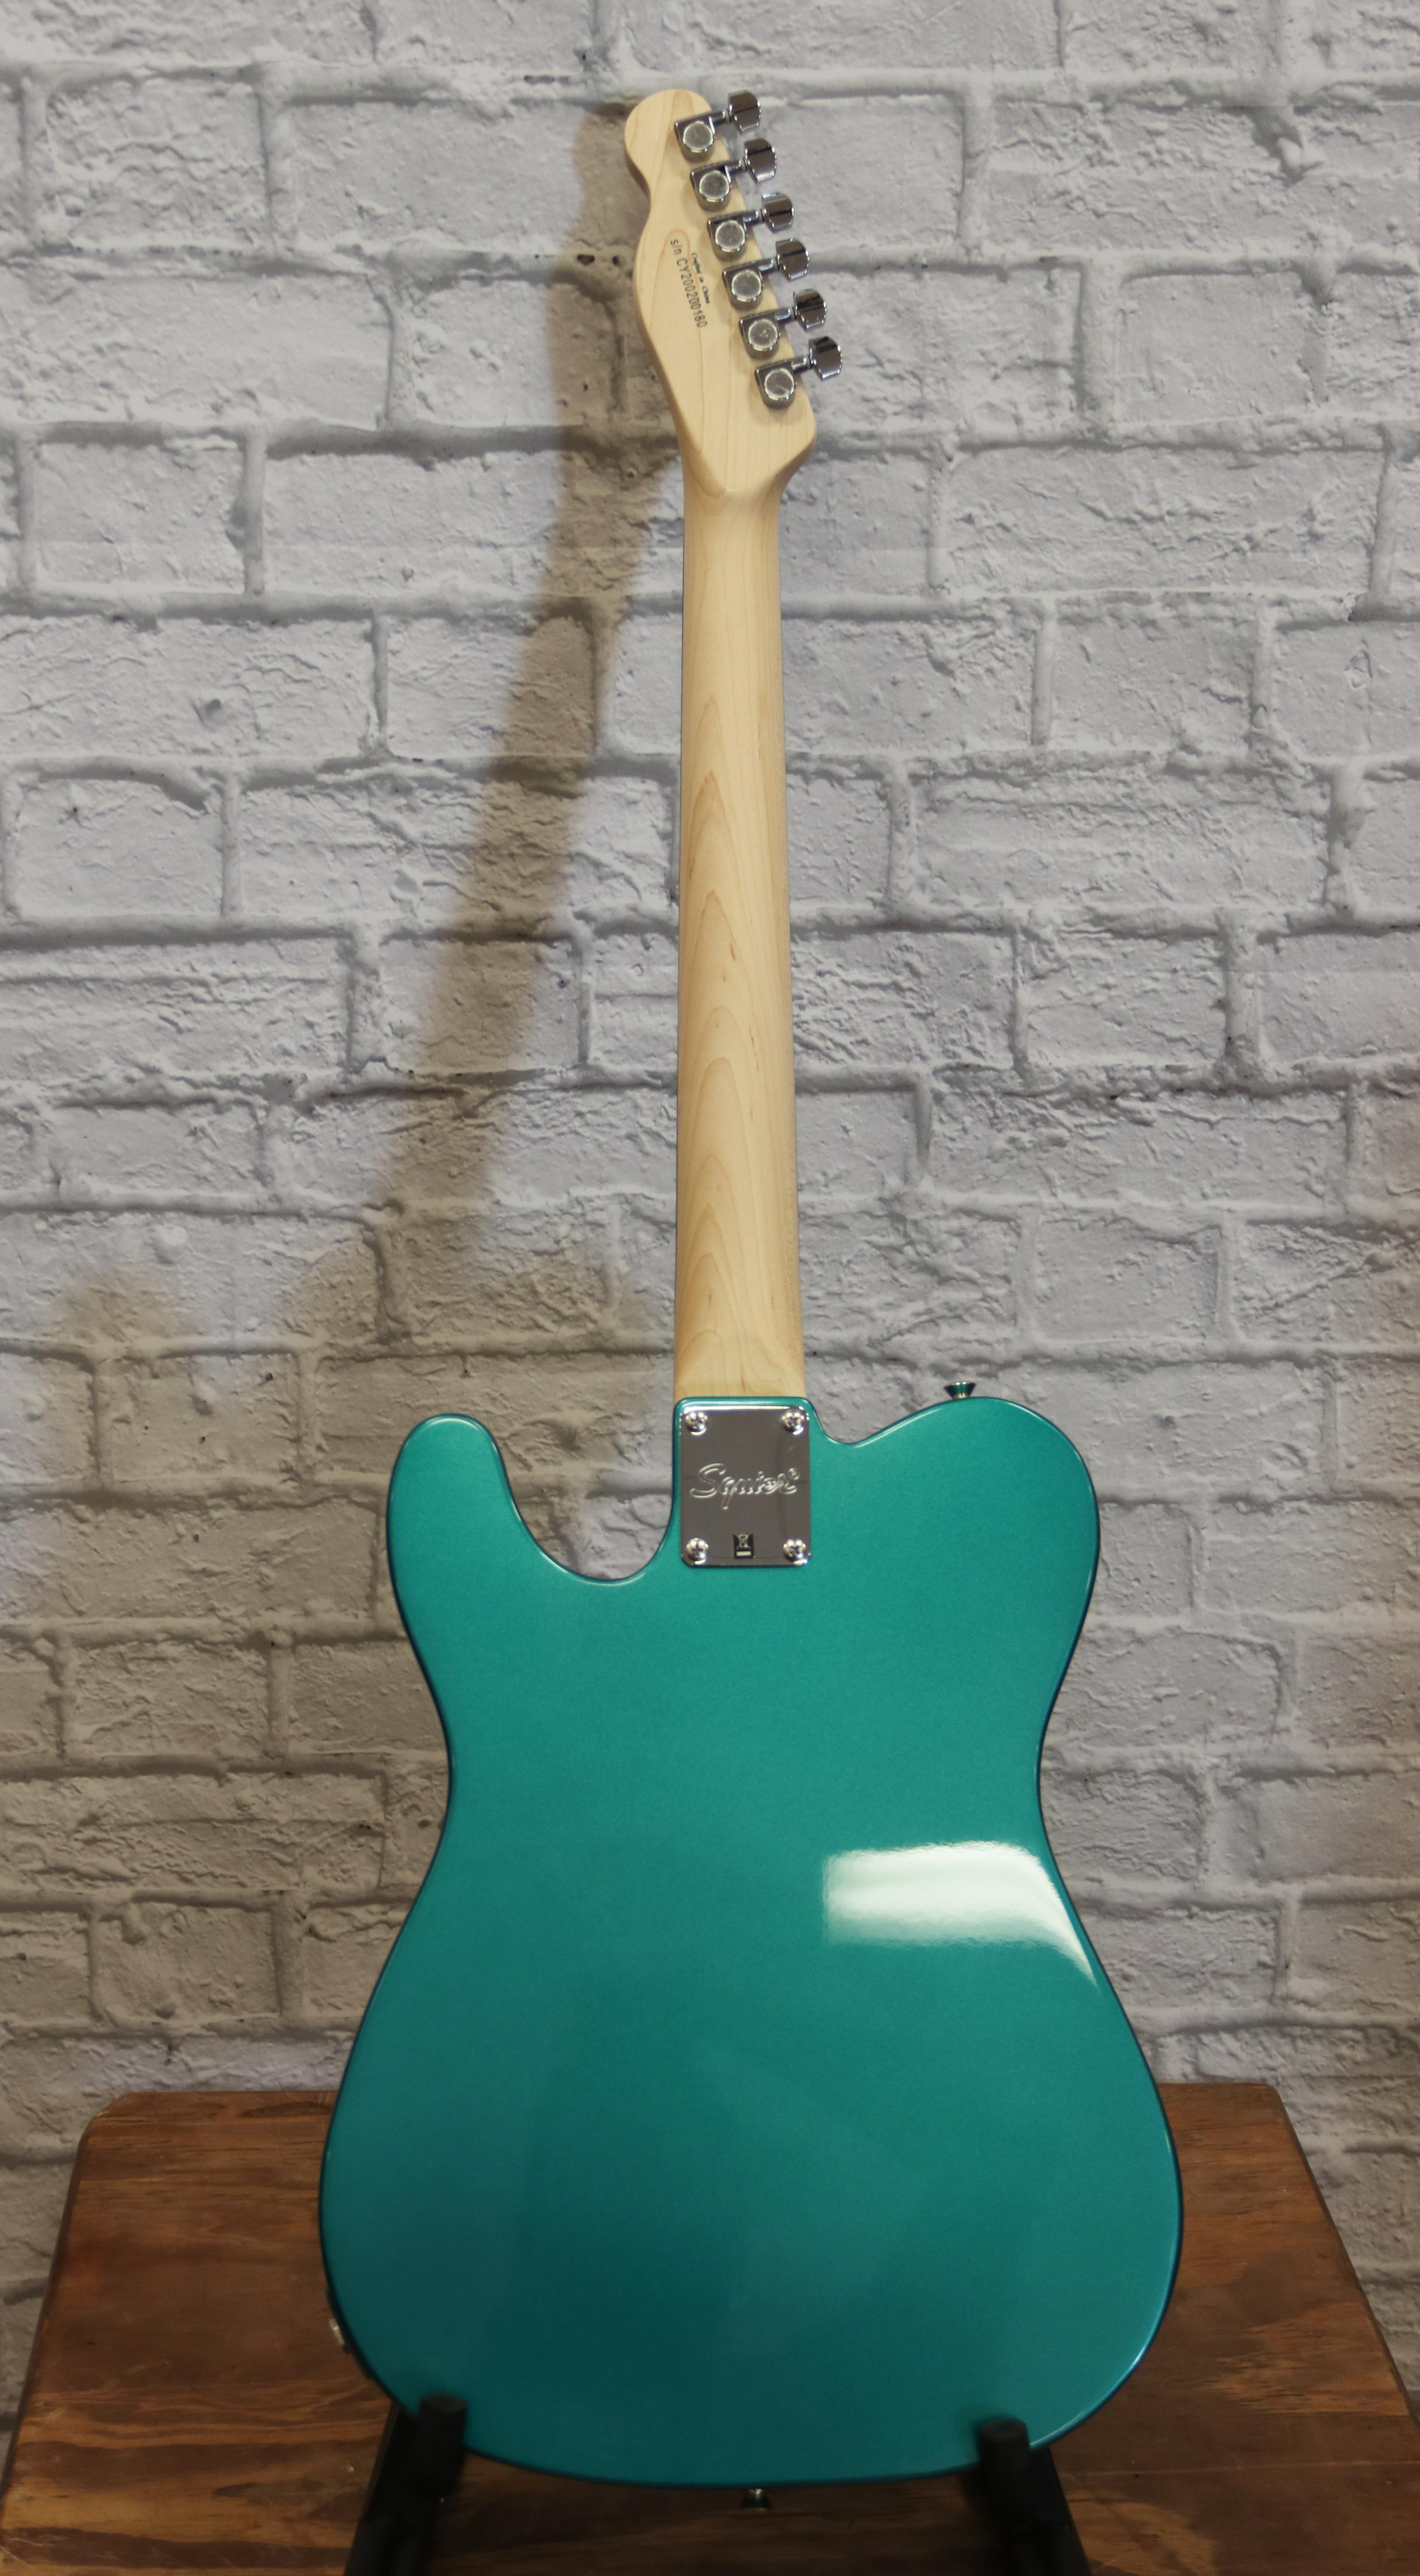 squire affinity telecaster